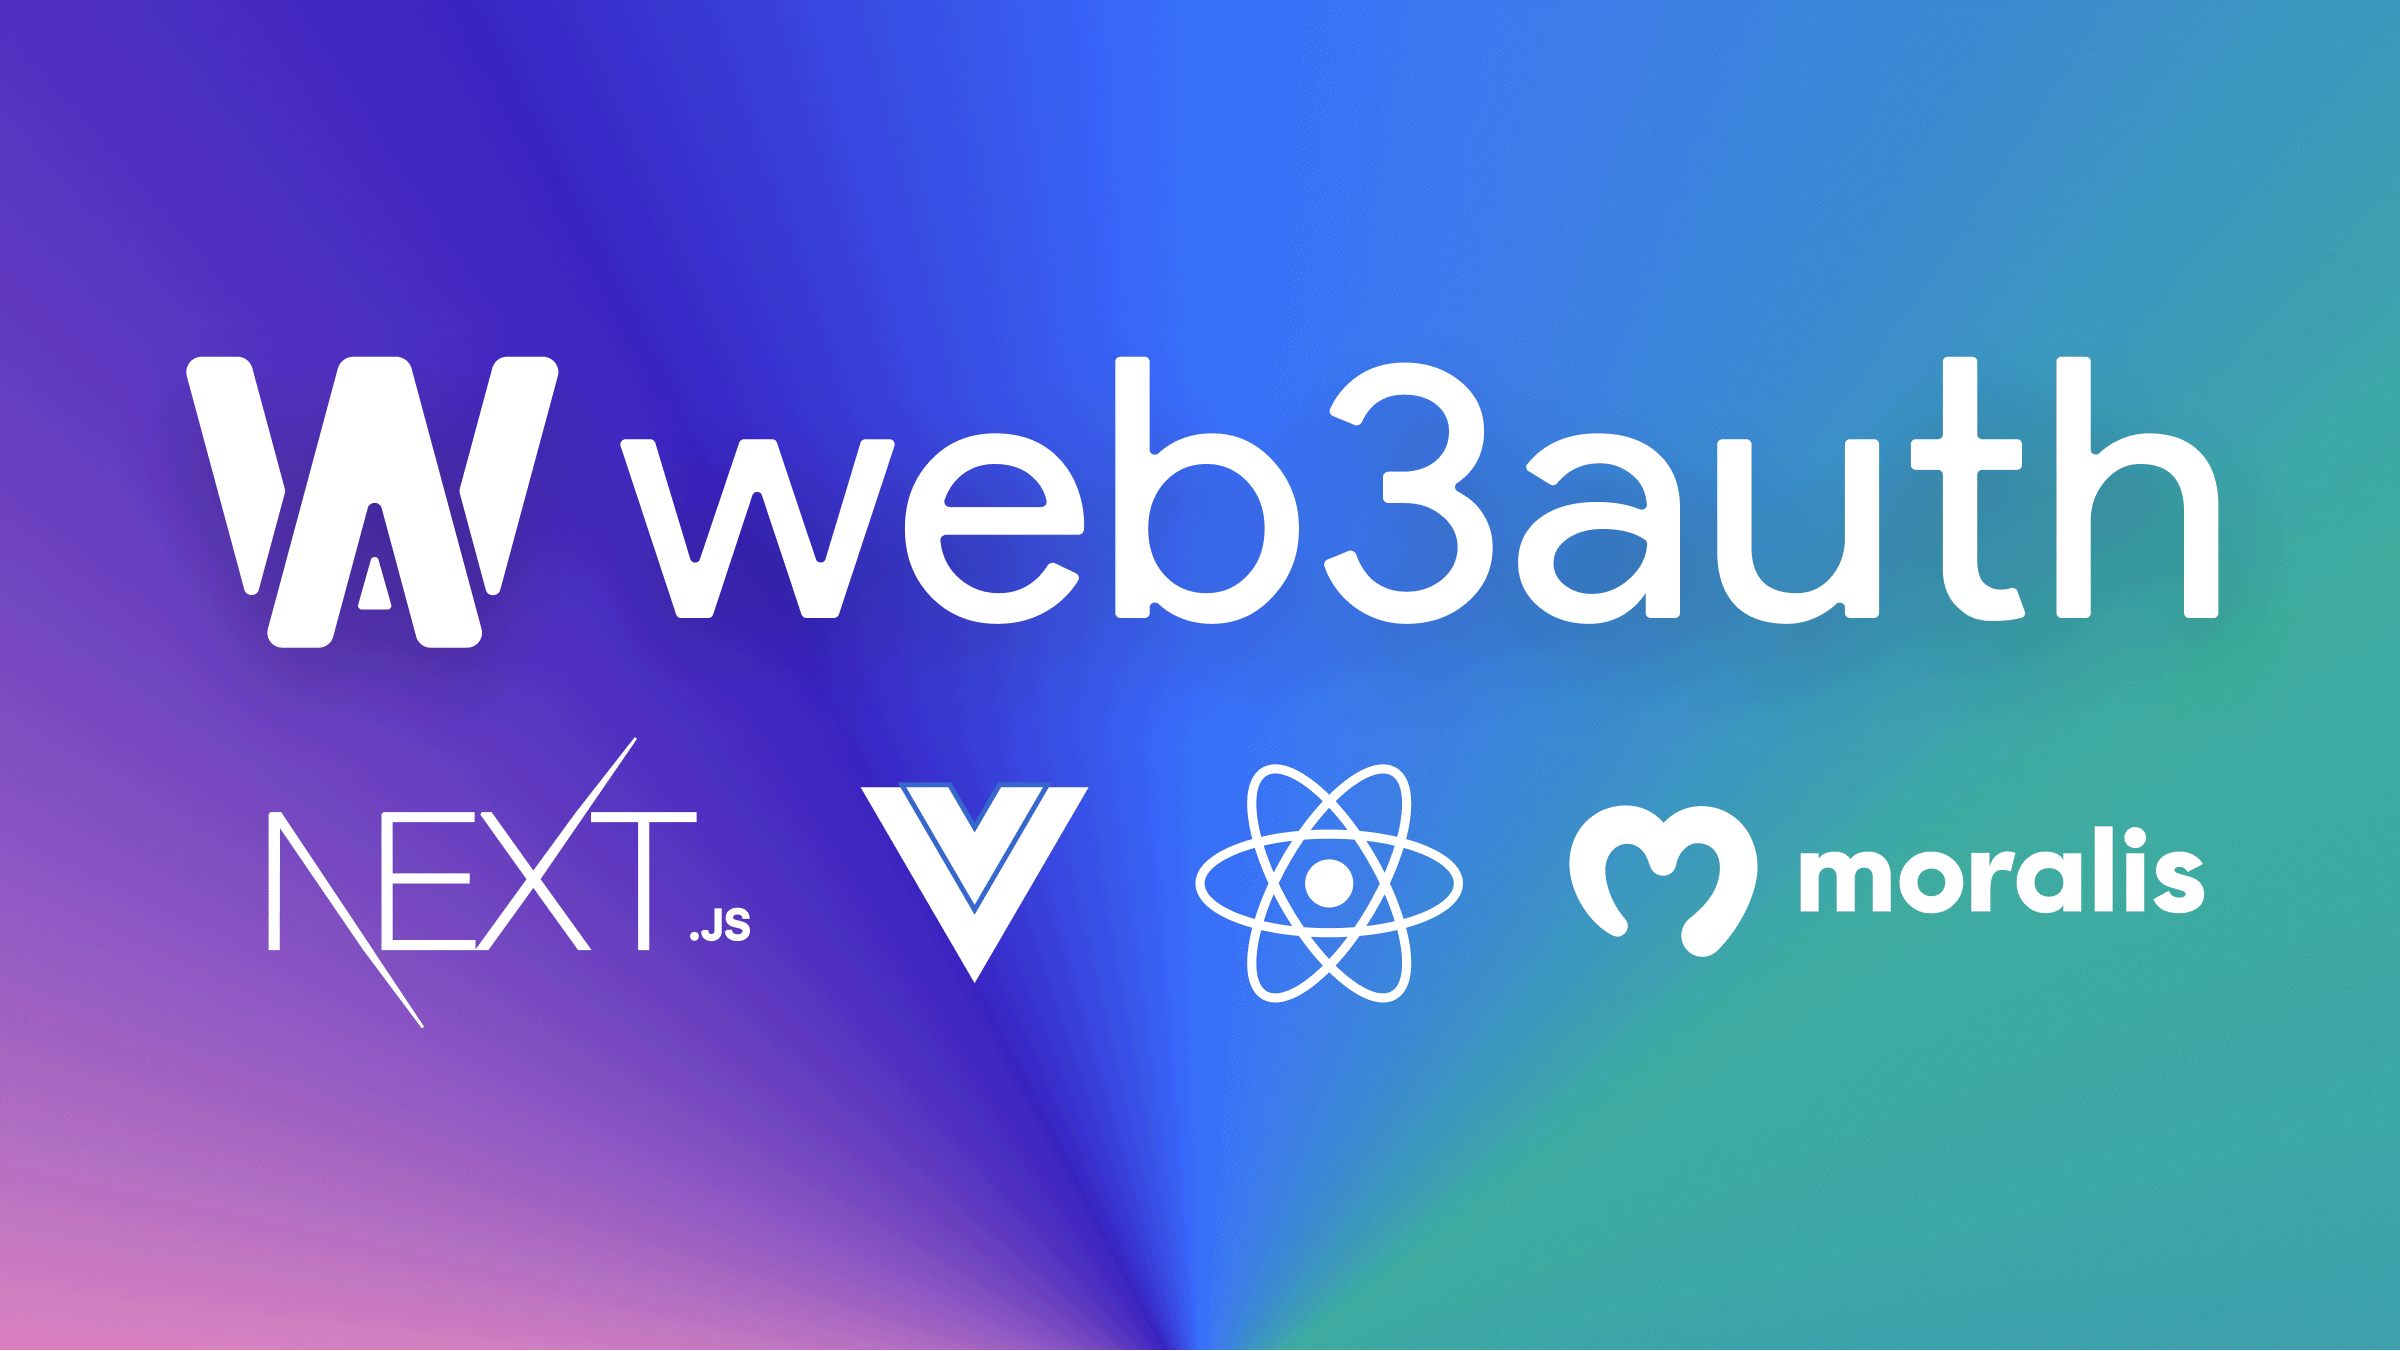 Web3 Authentication with Next.js, React, and Moralis